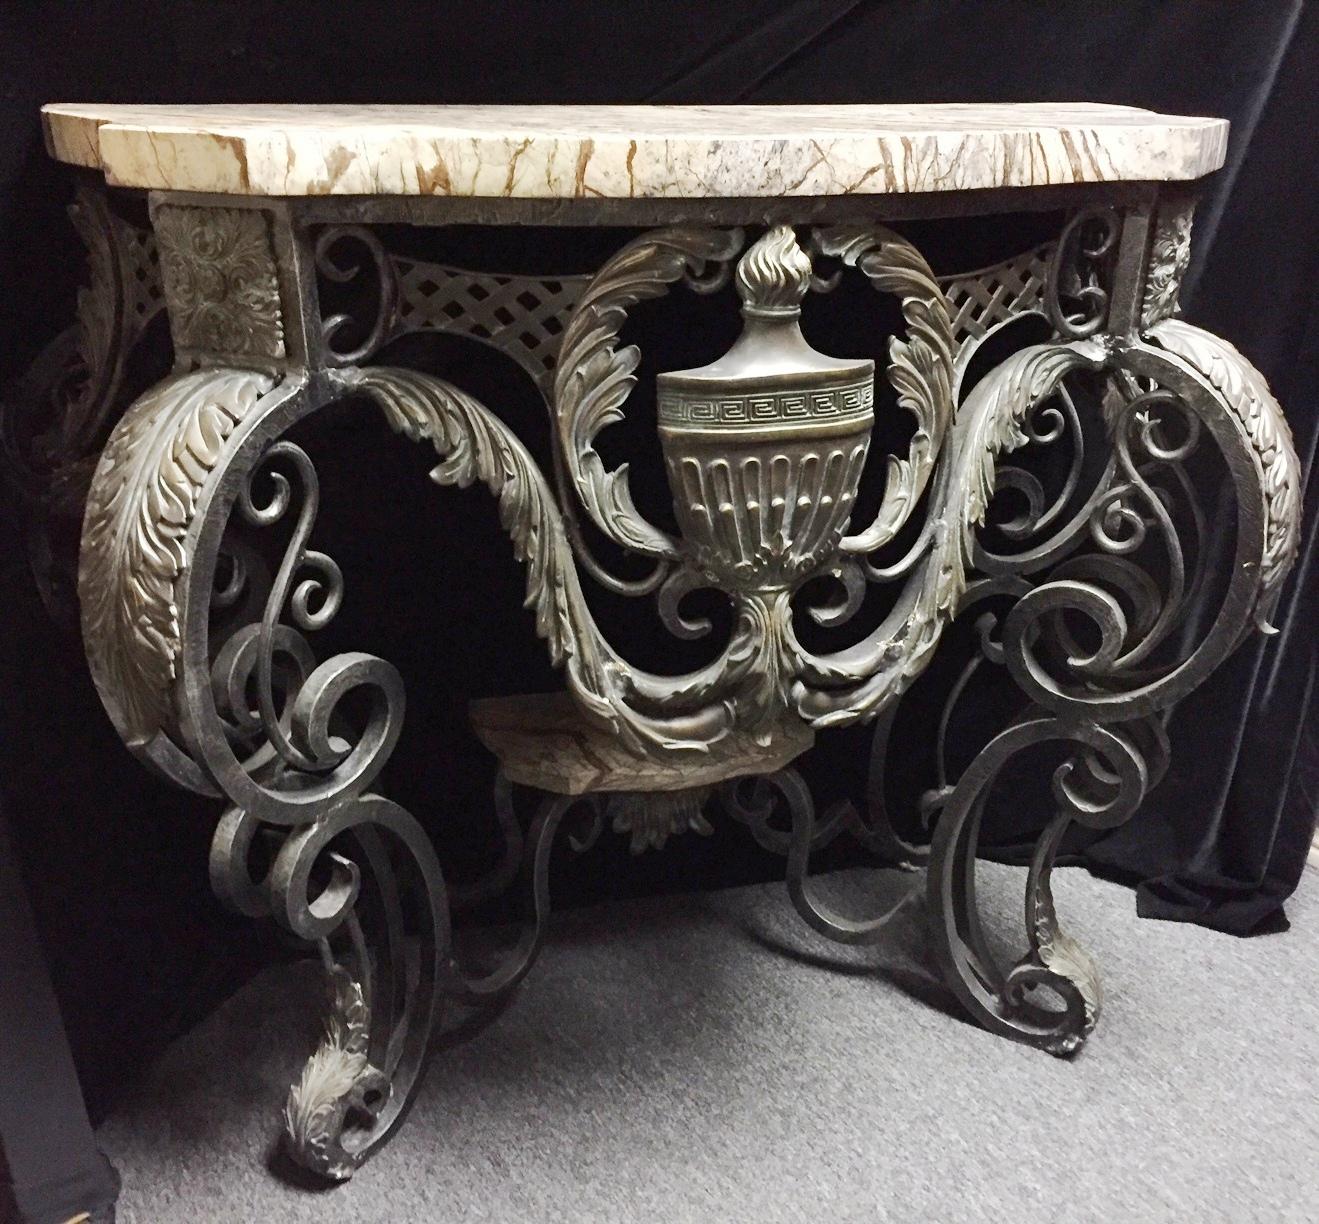 Attractive Italian Baroque style hand forged wrought iron and bronze console with thick marble tops centered with a bronze urn encased in a foliage cartouche and supported by four double scrolled legs mounted with bronze acanthus leaves and